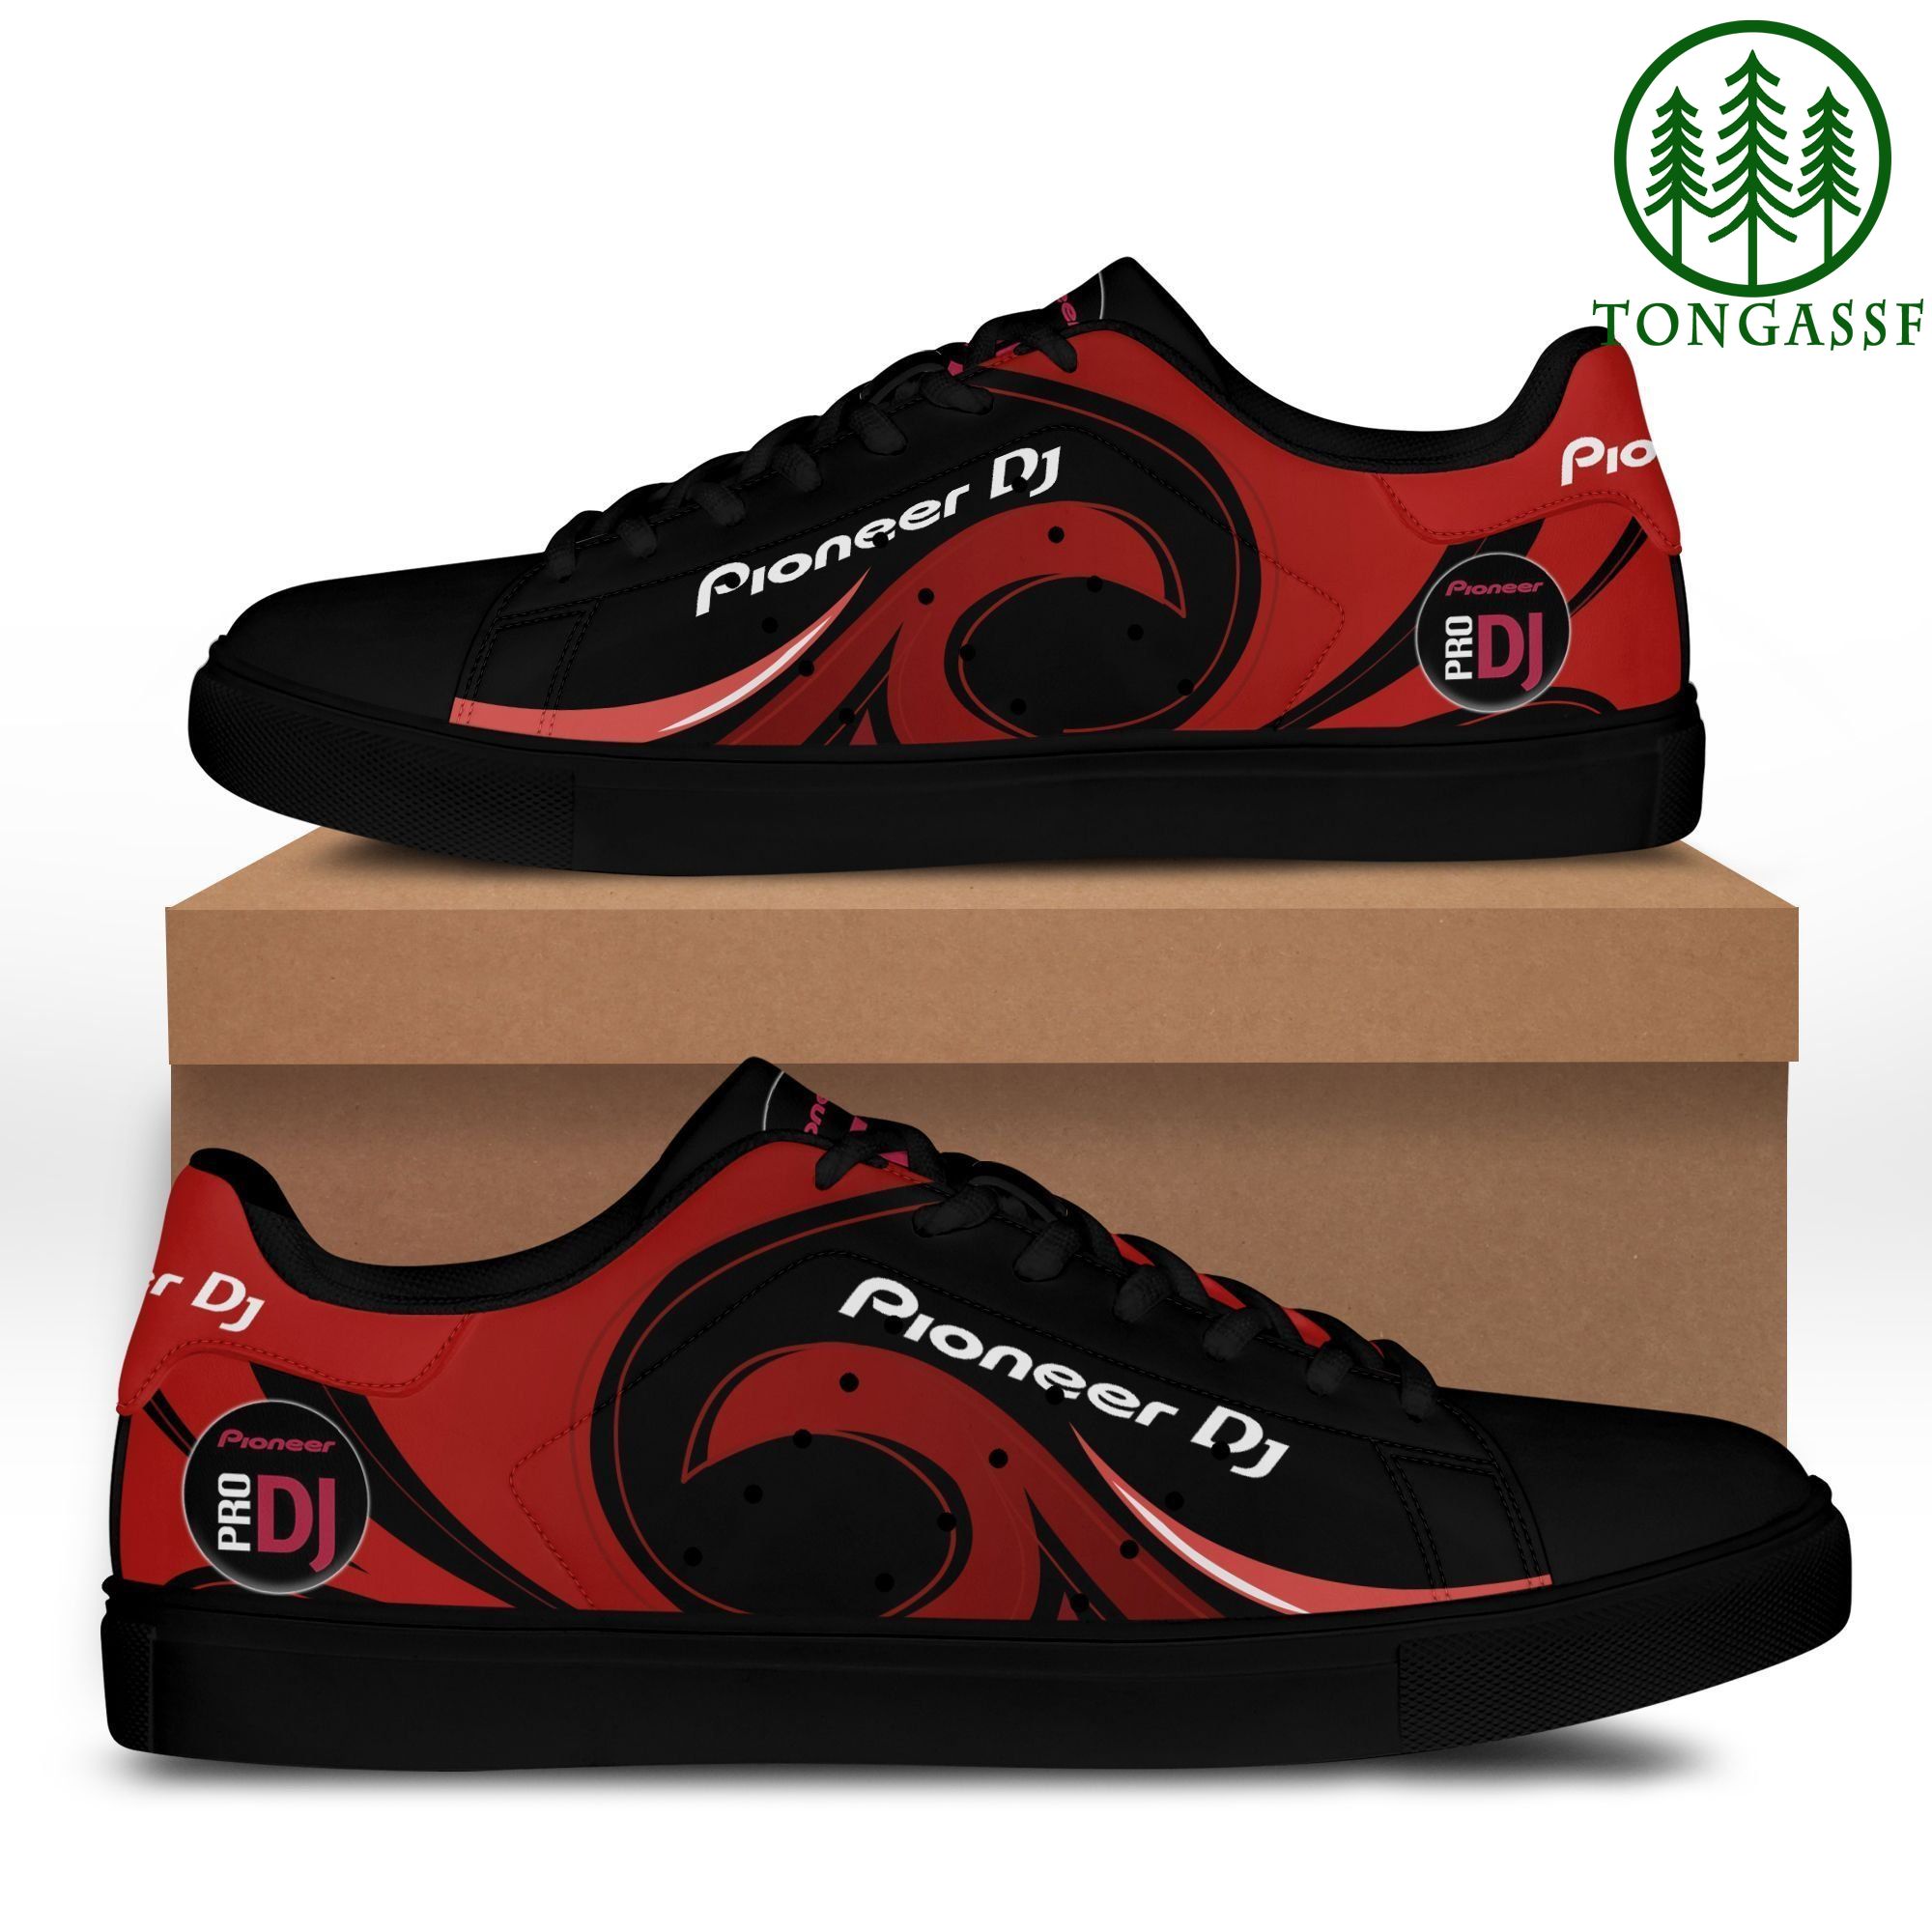 WaGZTlPC 23 Pioneer DJ PRO Black and red version Stan Smith shoes